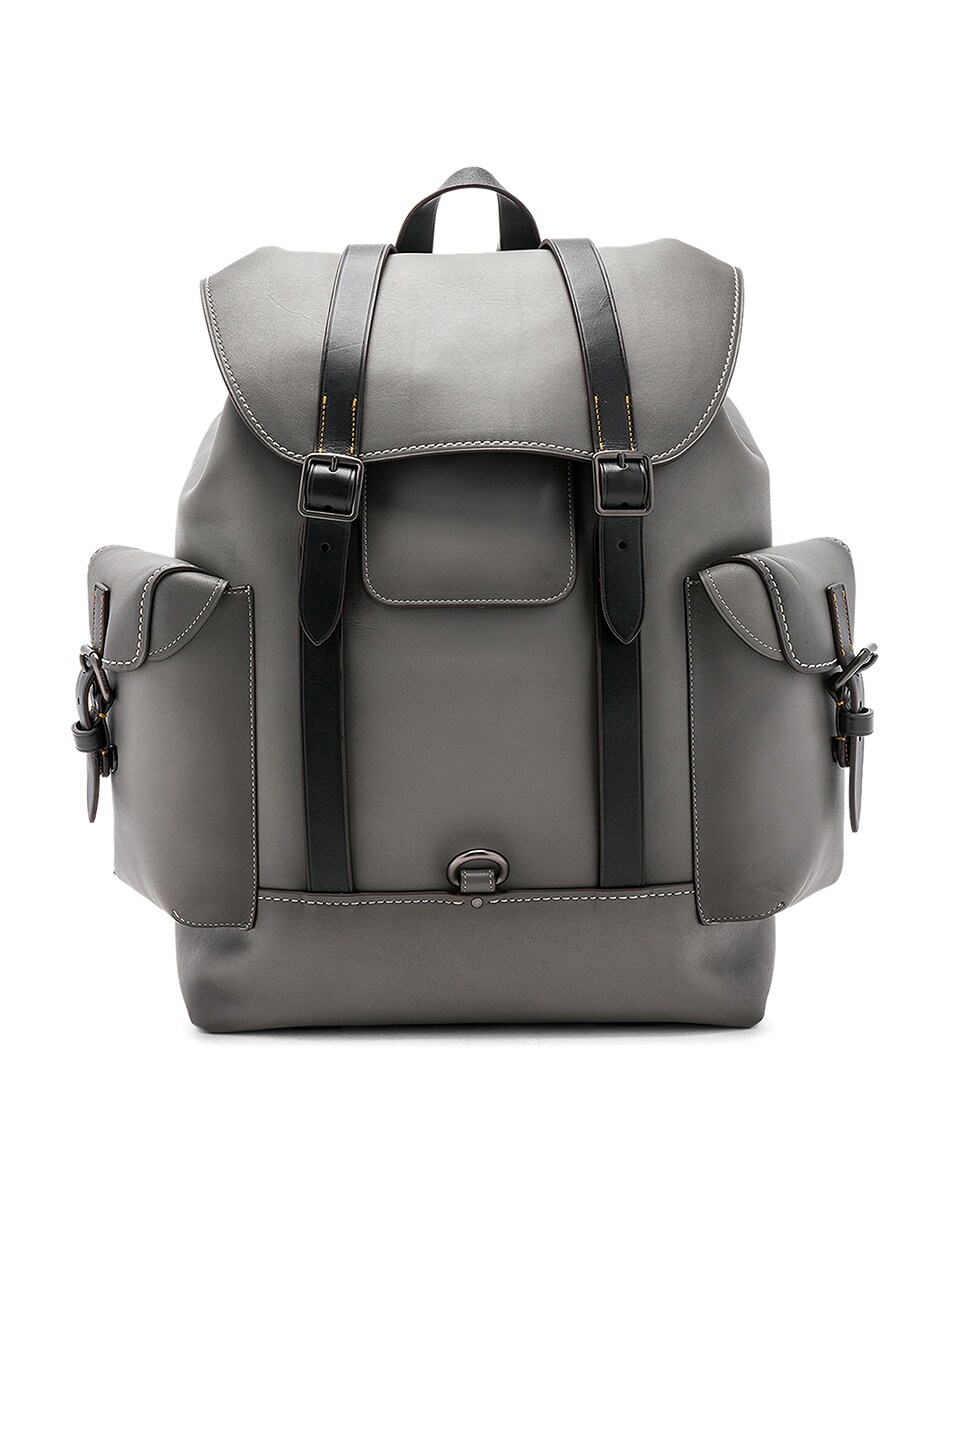 Image 1 of Coach Gotham Backpack in Heather Grey & Black